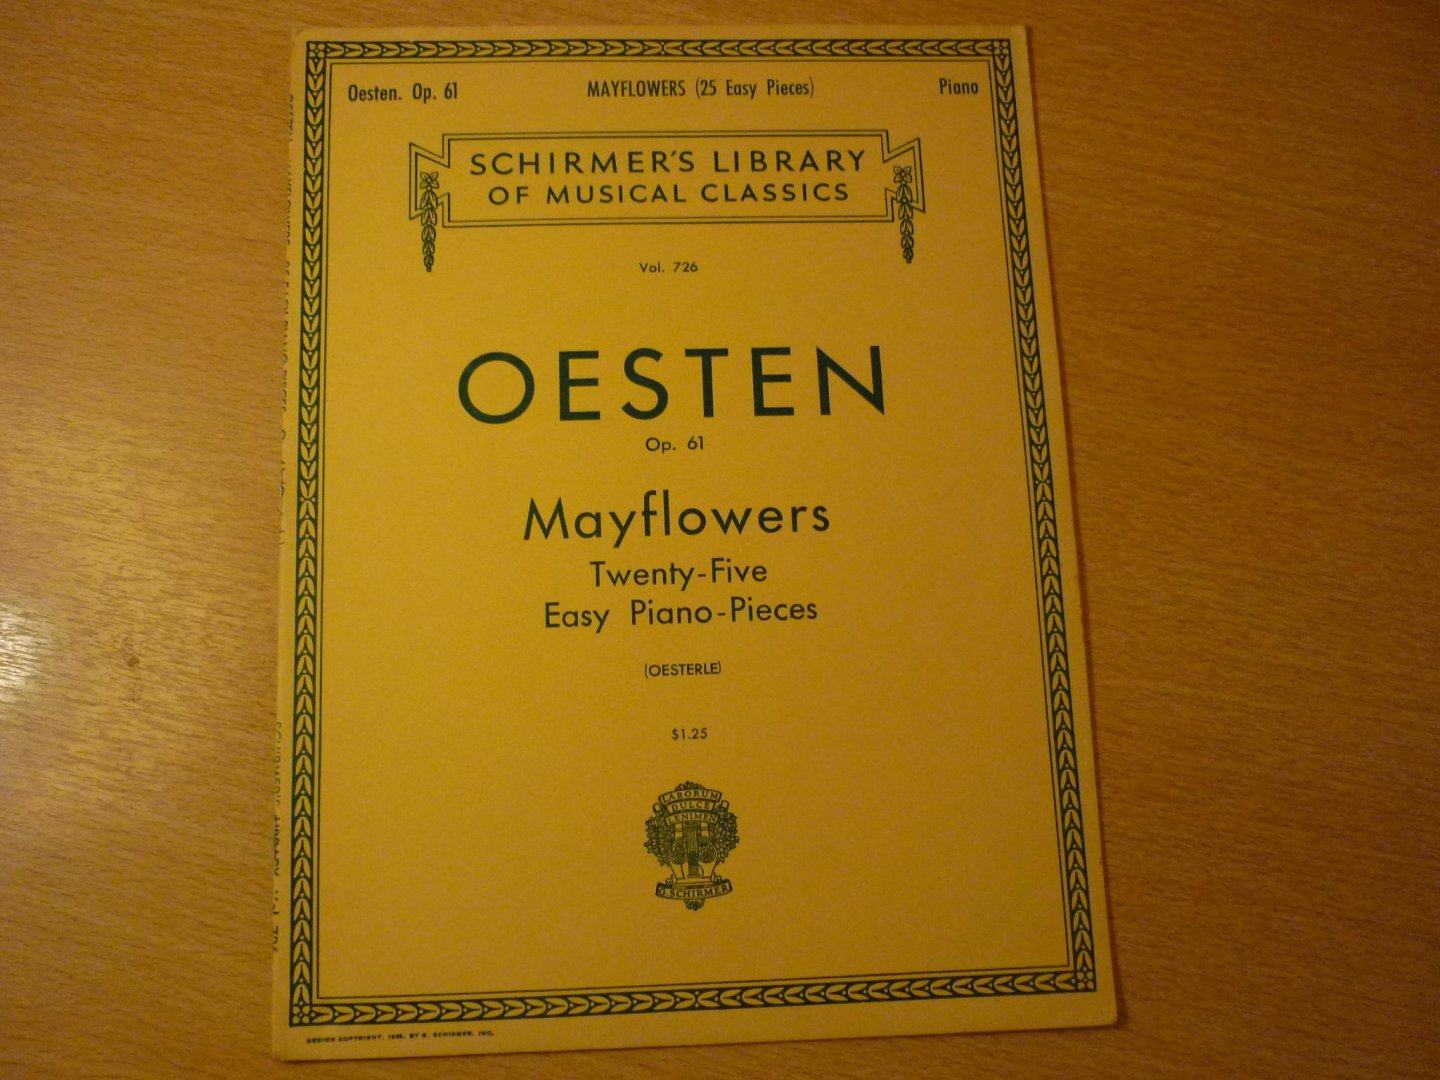 Oesten; Theodor - Mayflowers; (Fleurs de Mai. Maiblumchen) 25 Easy studies for Pianoforte by Theodor Oesten, Op. 61. Piano Solo (edited and fingered by Louis Oesterle)